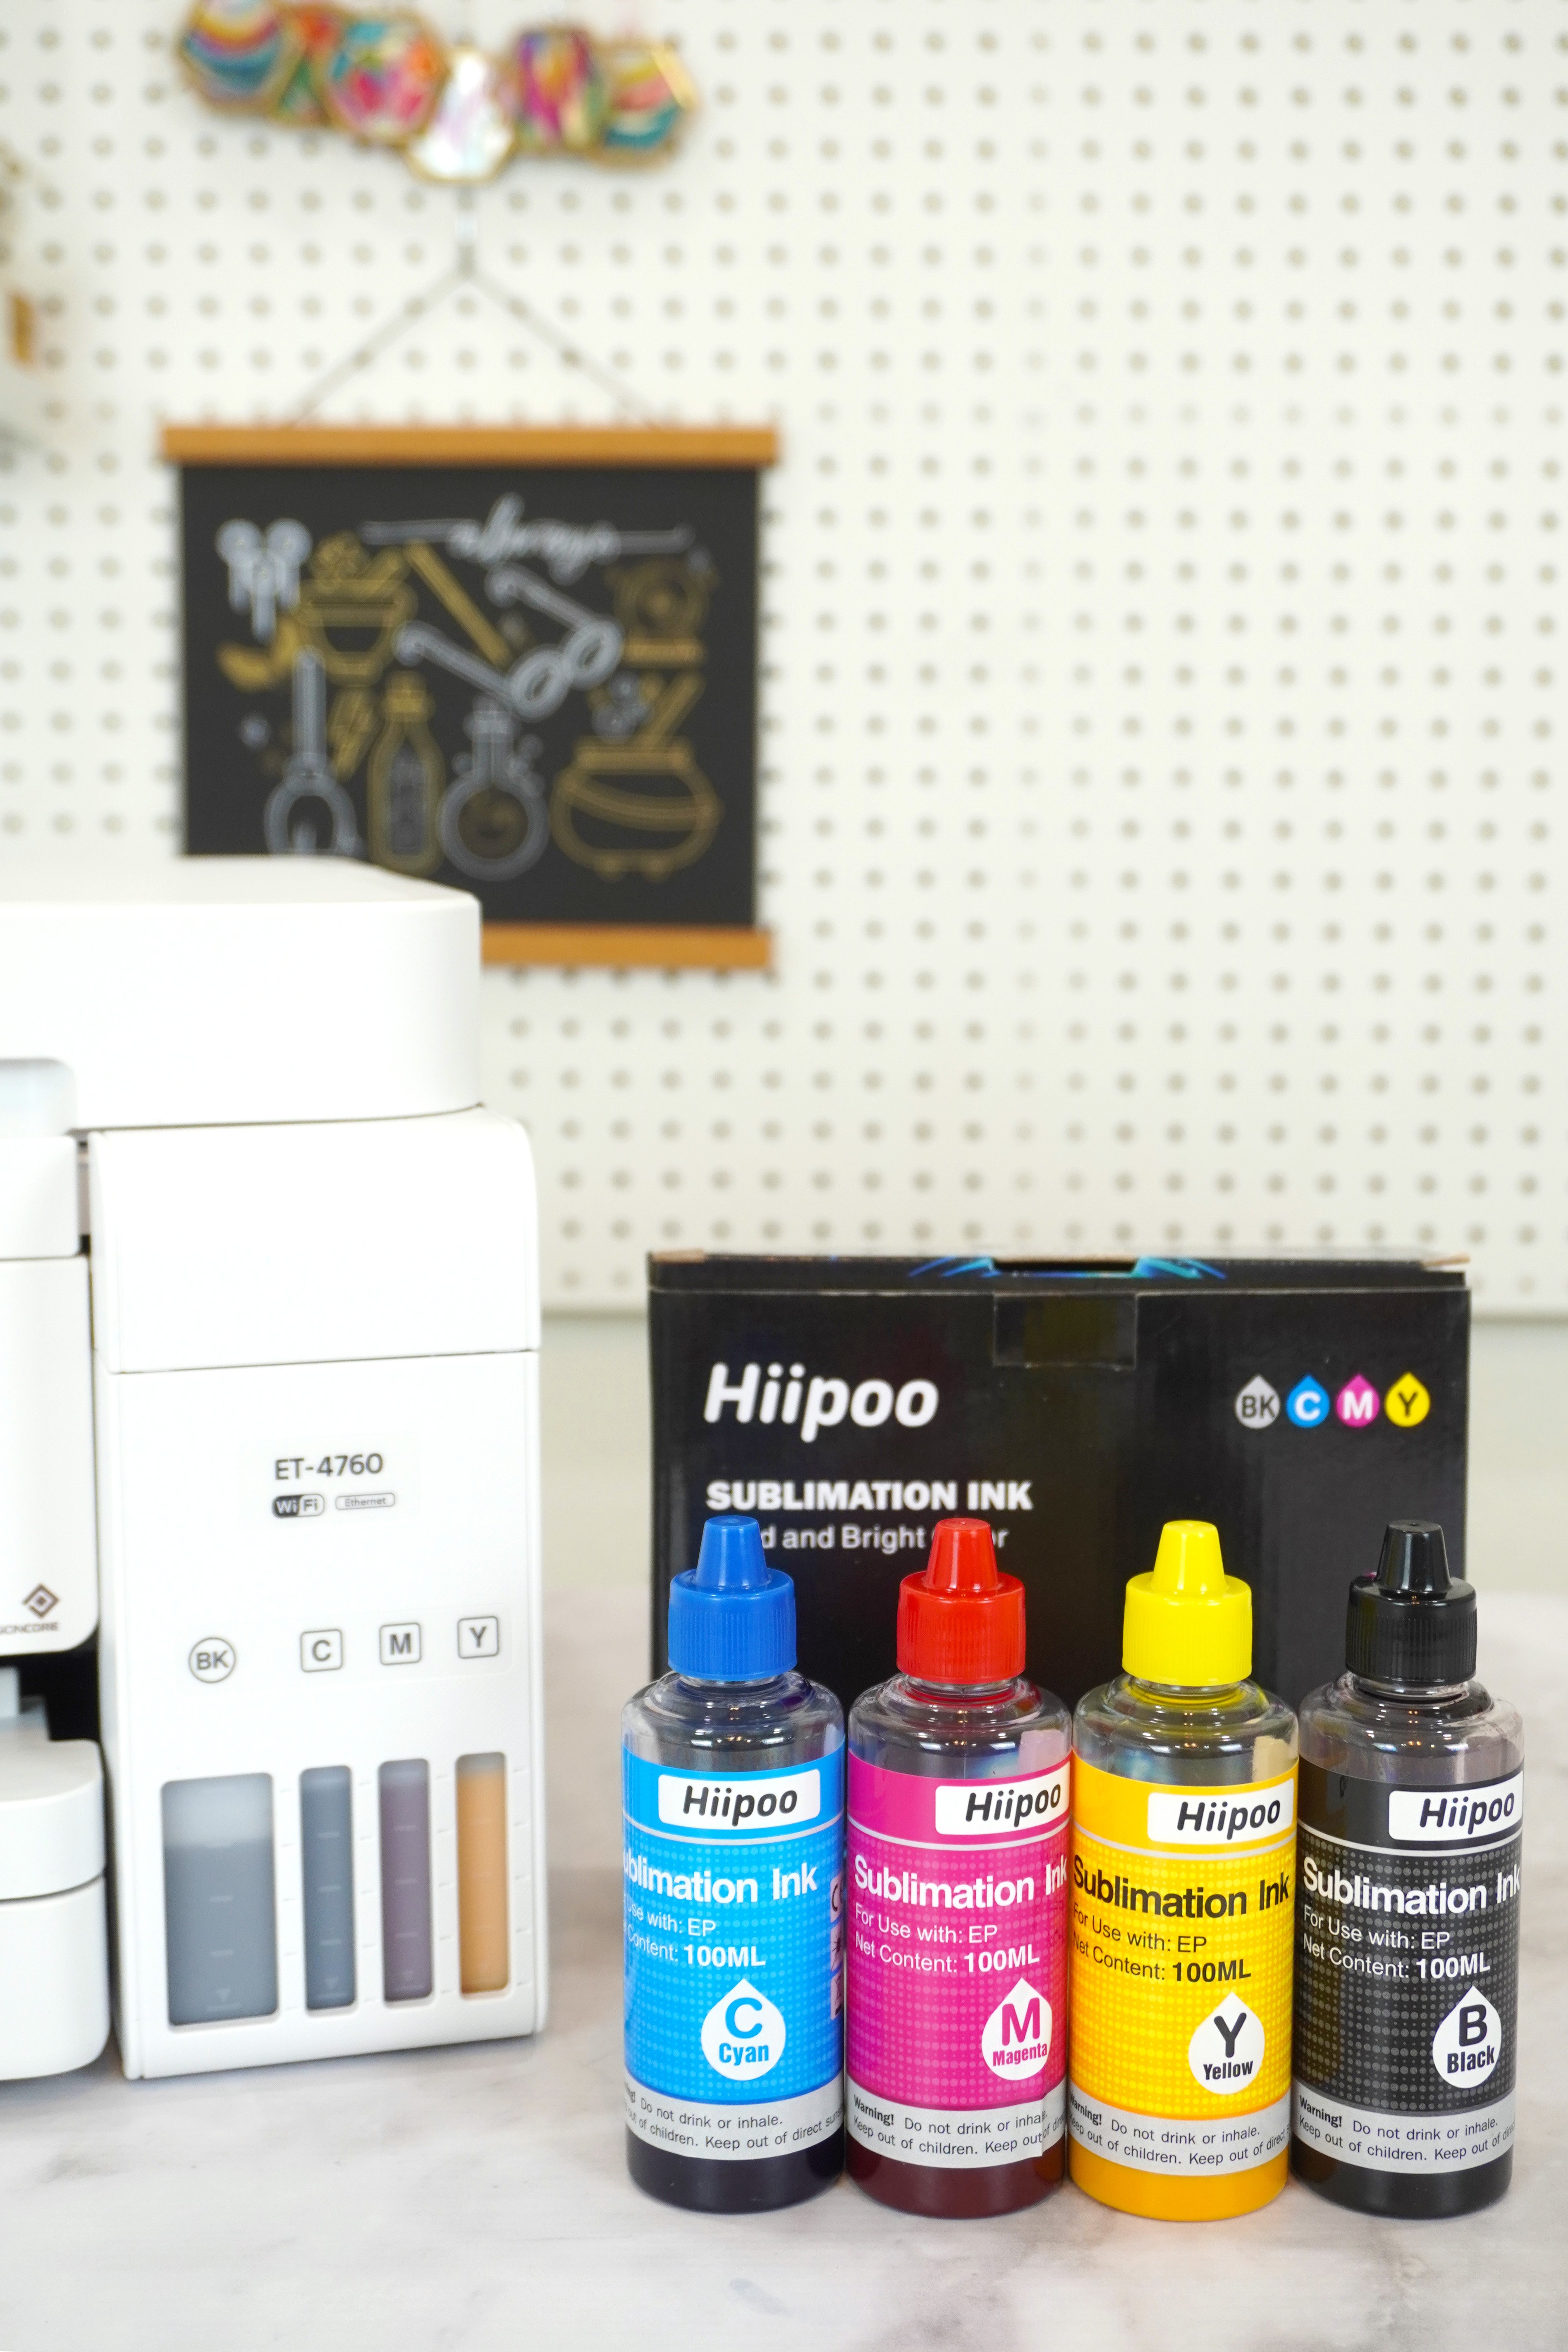 How to Convert an Epson EcoTank to a Sublimation Printer